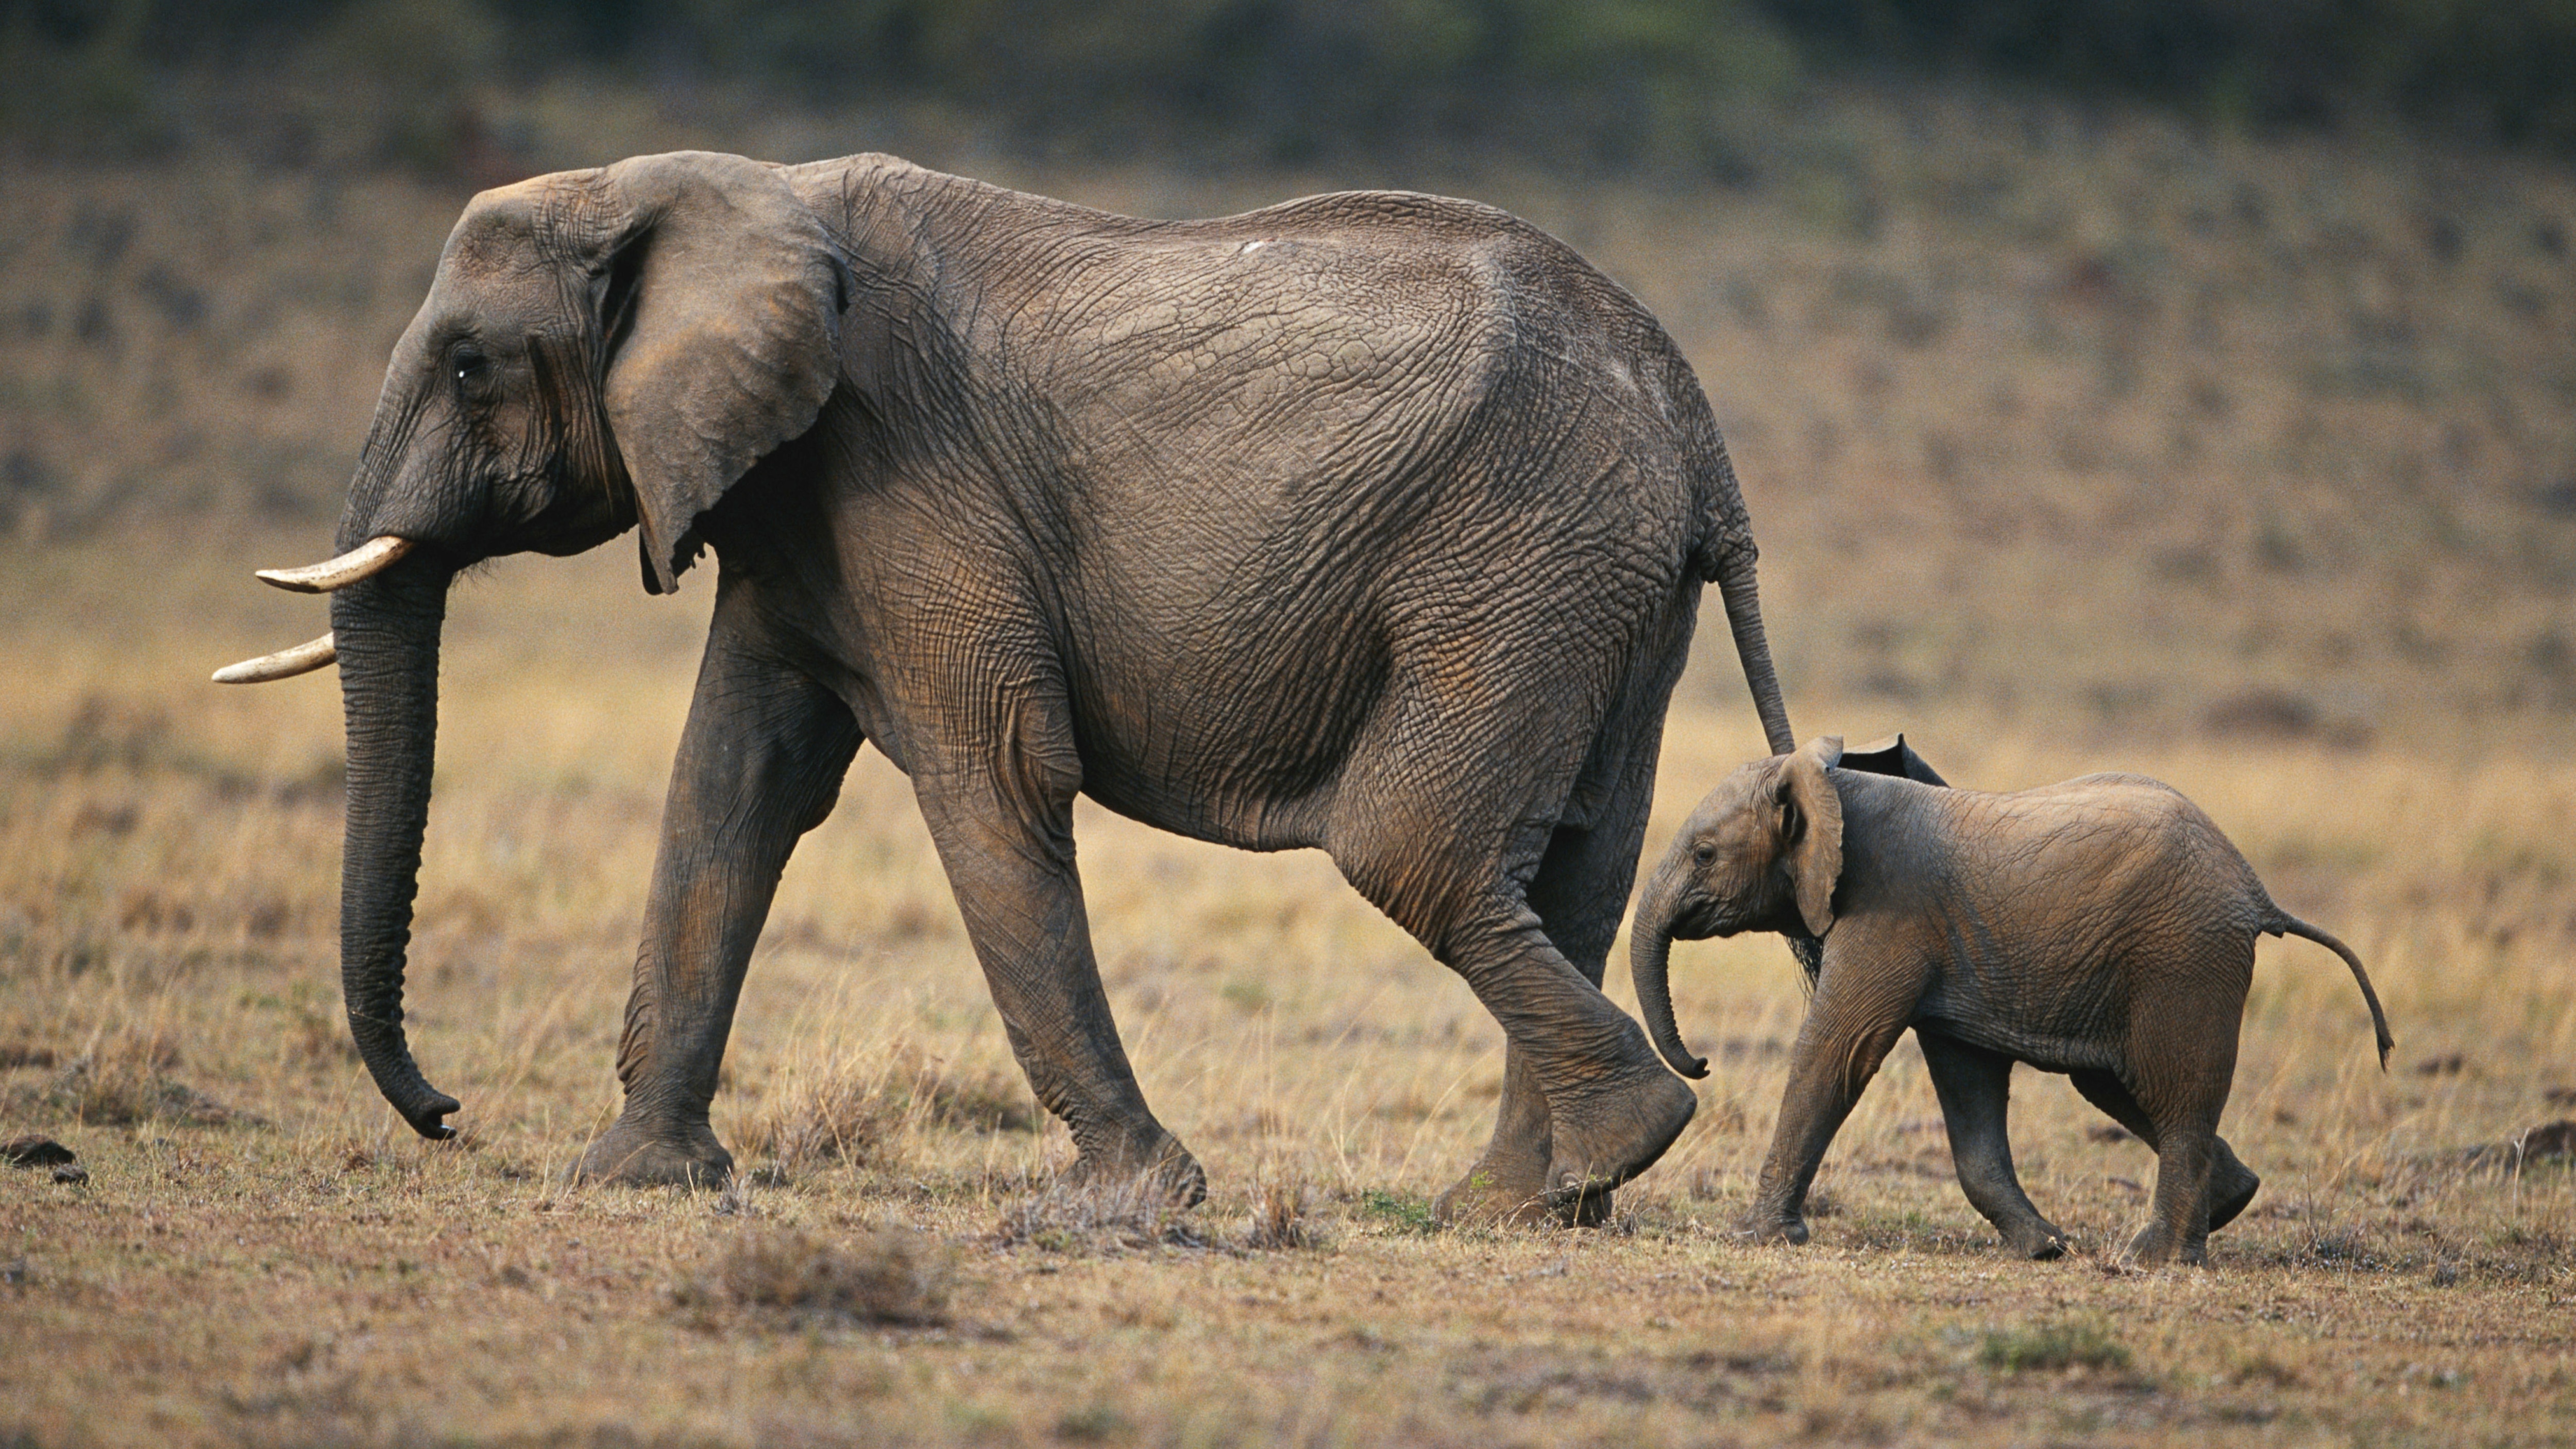 What is the average gestation period of an elephant?